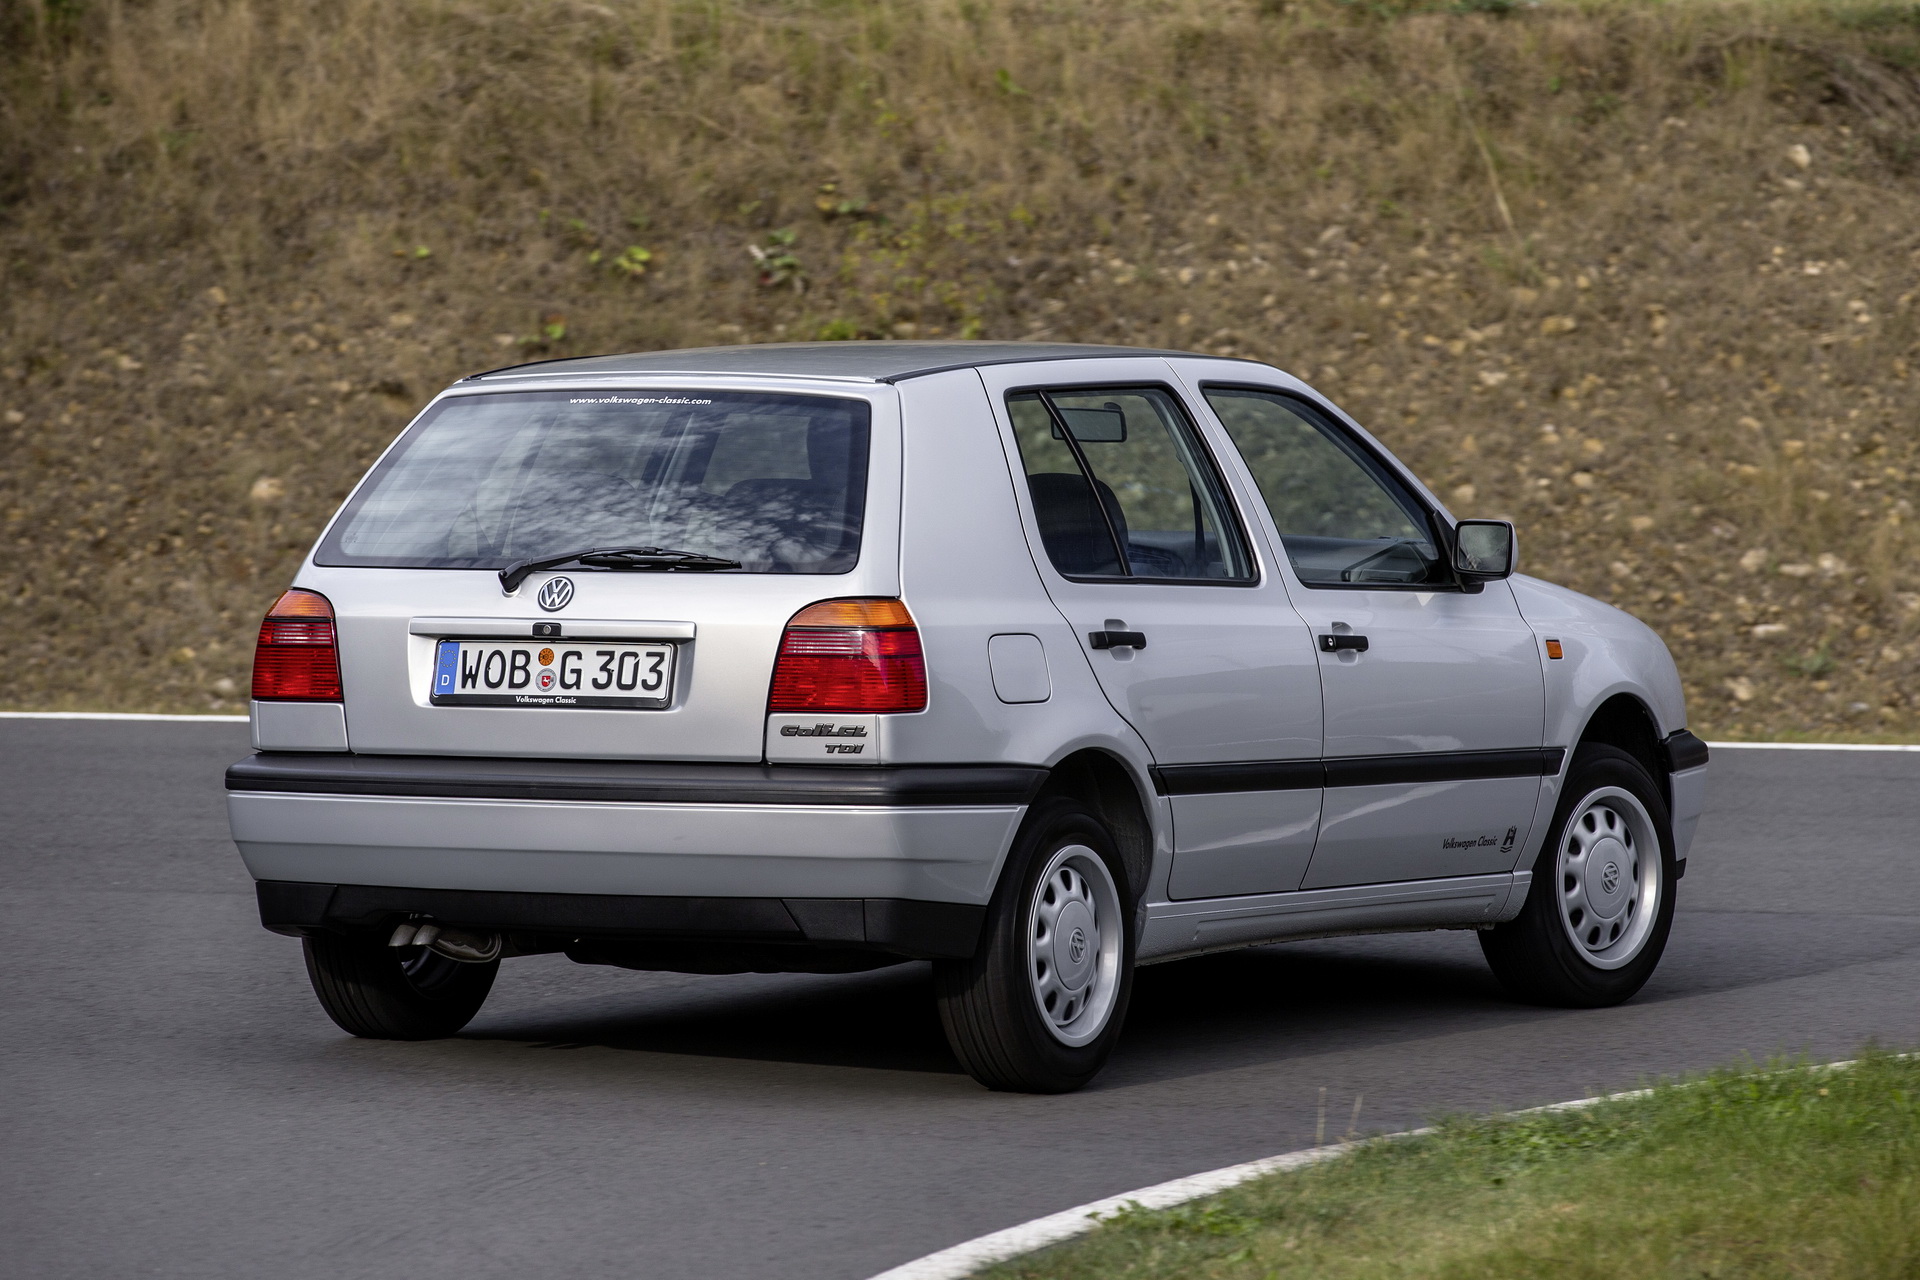 Vw Golf Countdown 1991 1996 Mk3 Was Full Of Safety Firsts